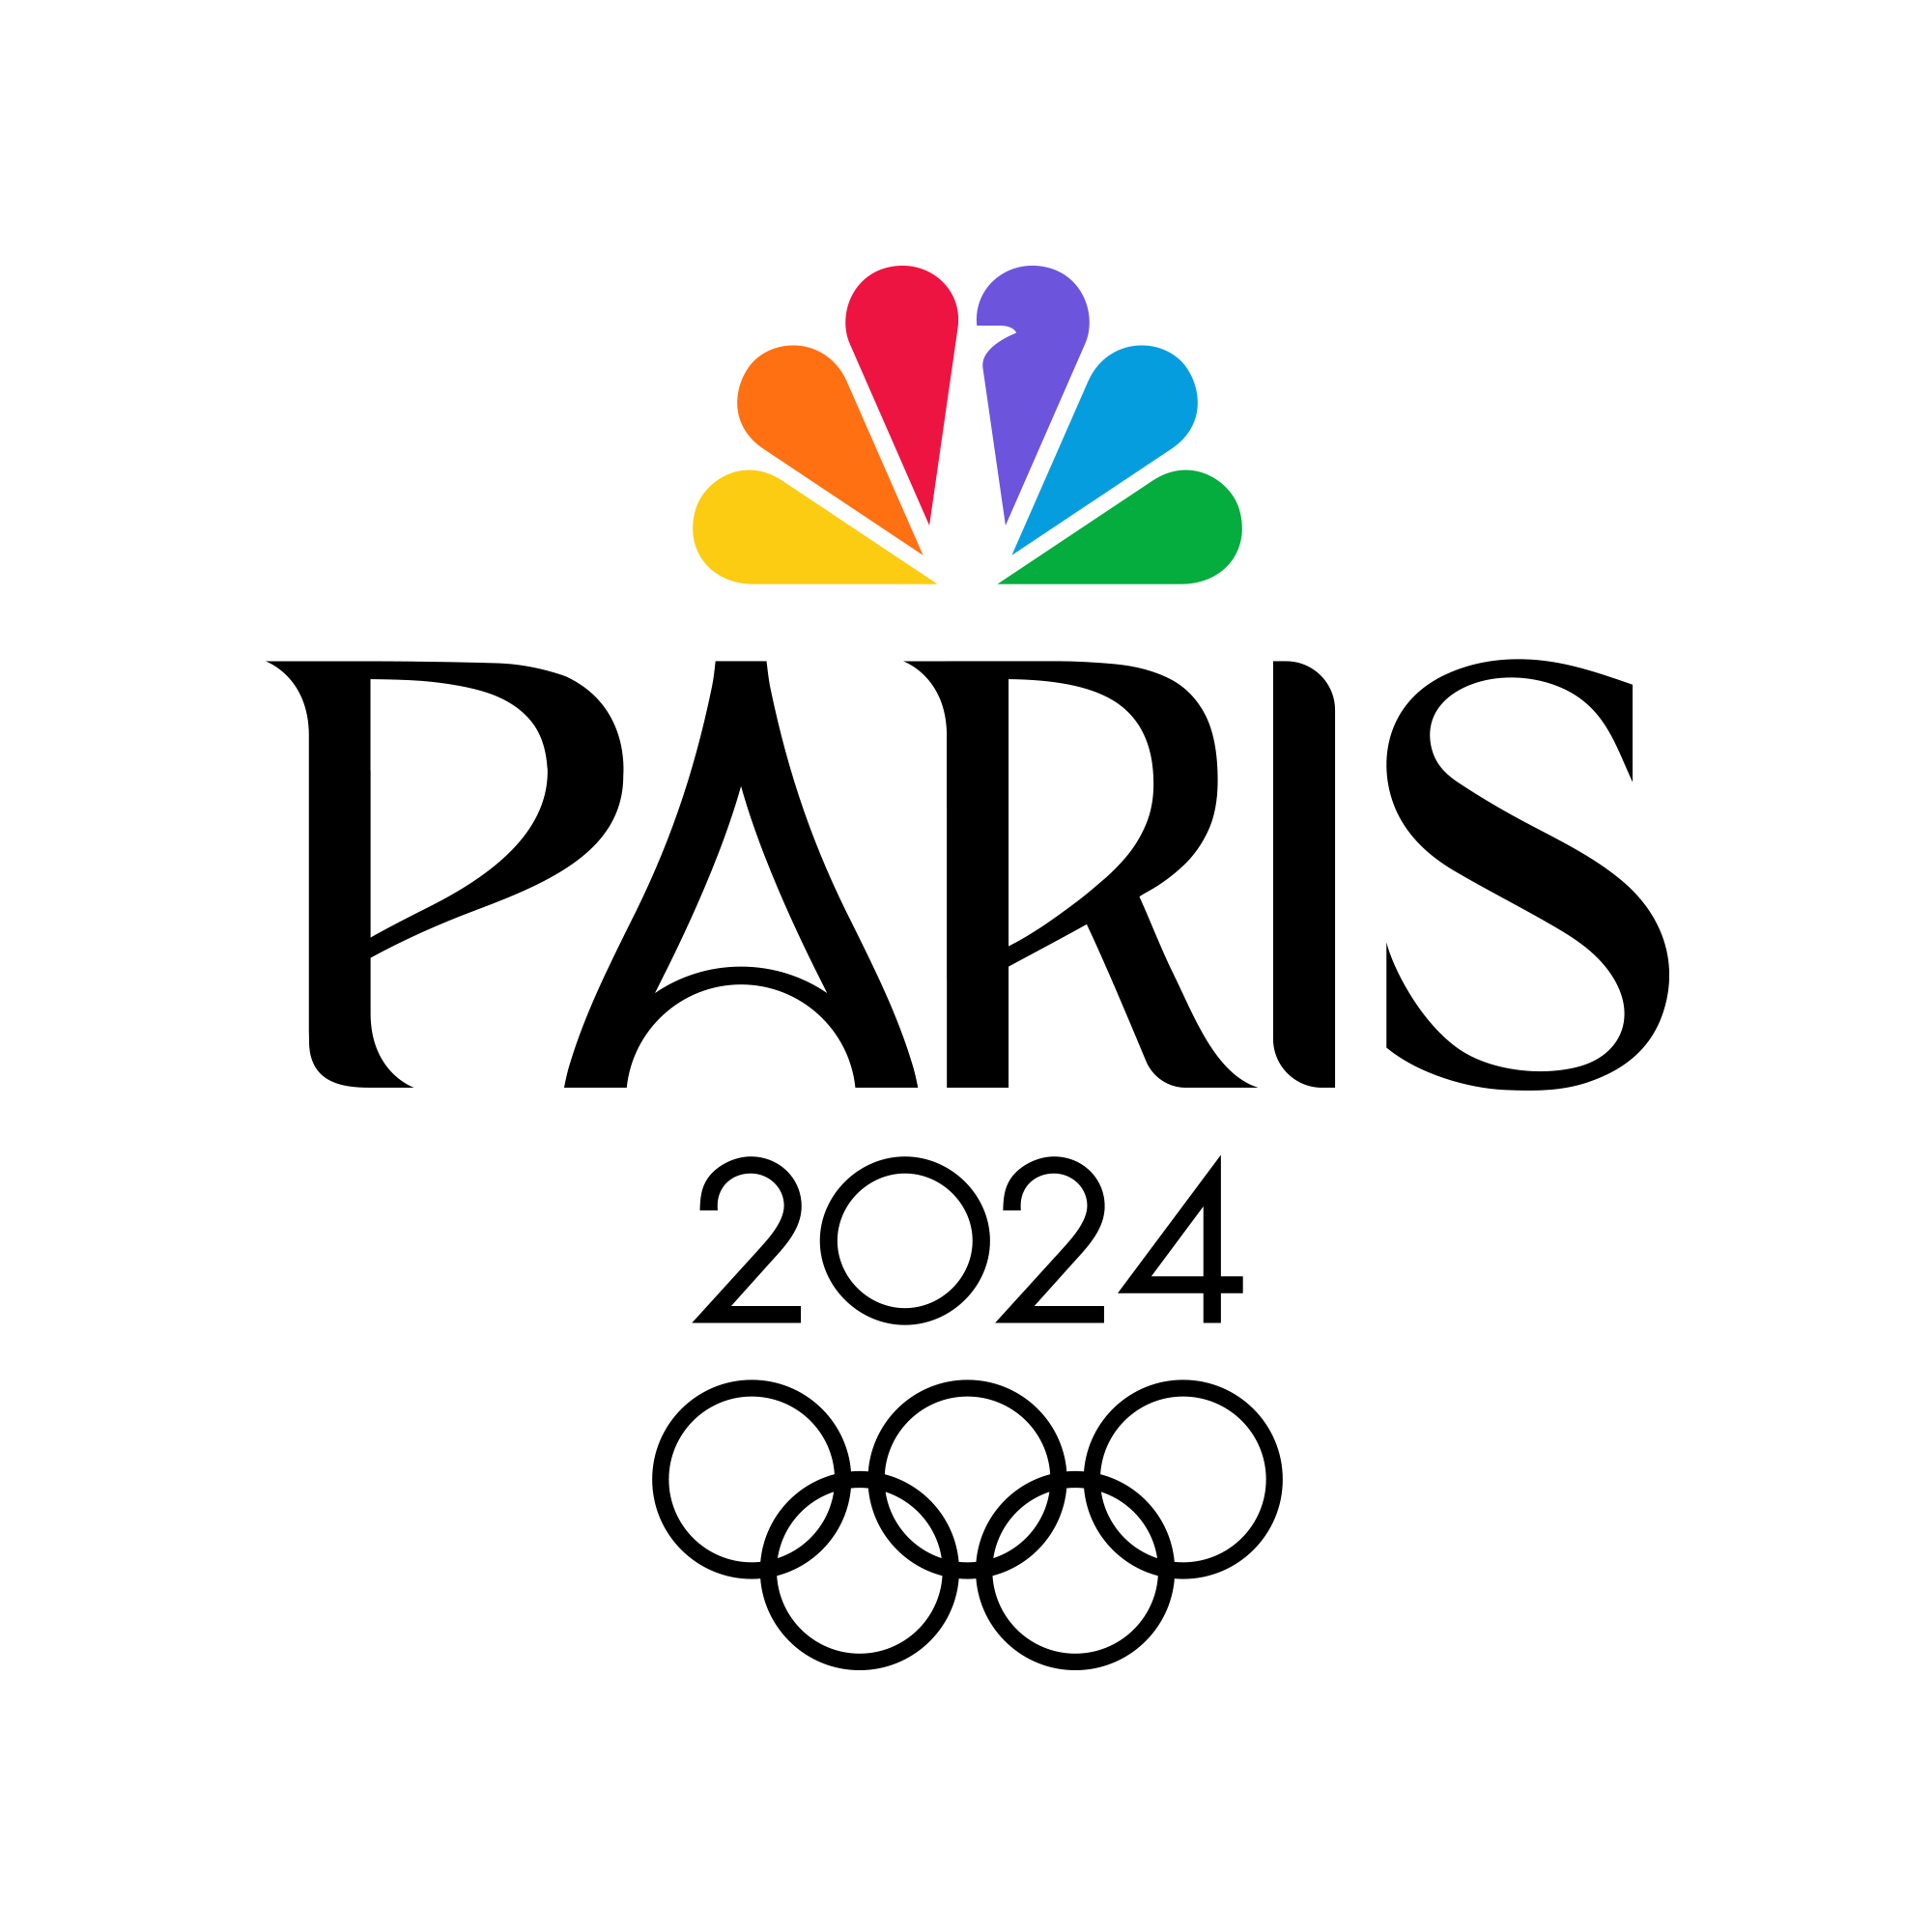 NBCUNIVERSAL FORTIFIES OLYMPIC AND PARALYMPIC MEDIA PARTNERSHIPS WITH TWITTER AND SNAPCHAT; PROVIDING GREATER REACH AND SCALE FOR ADVERTISERS DURING OLYMPIC AND PARALYMPIC GAMES PARIS 2024